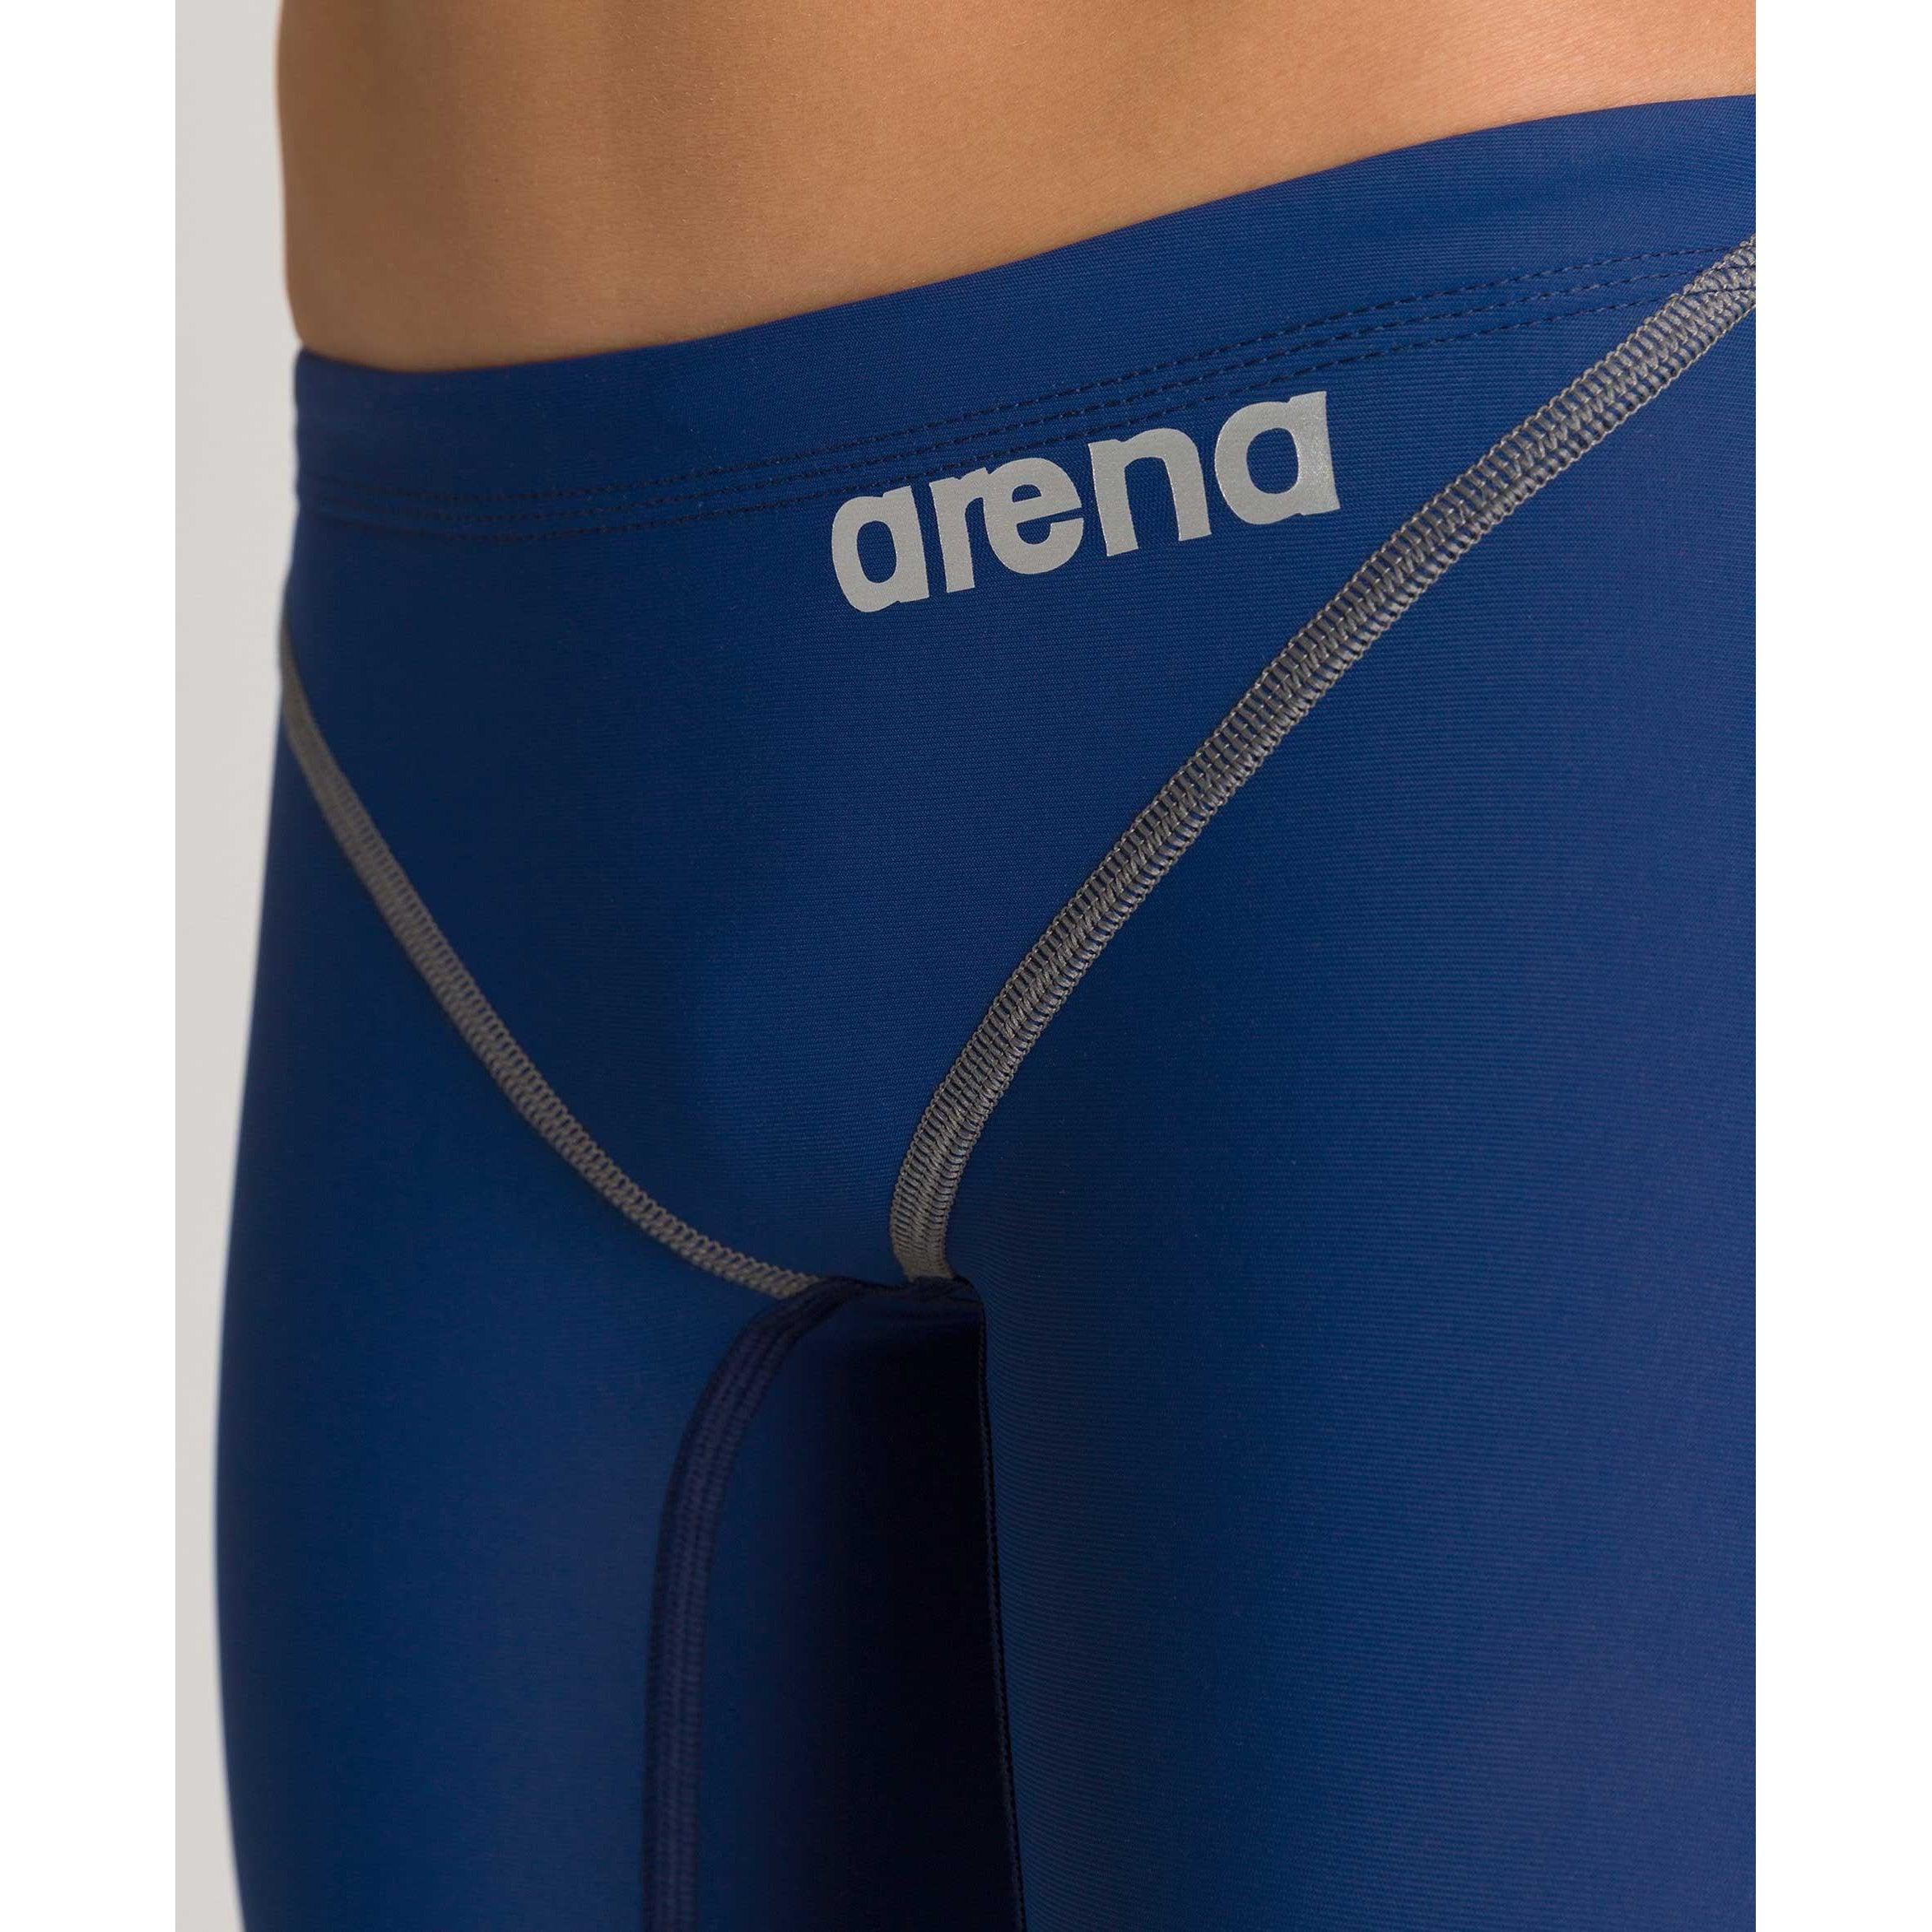 Arena Boys' POWERSKIN ST 2.0 Youth Jammer